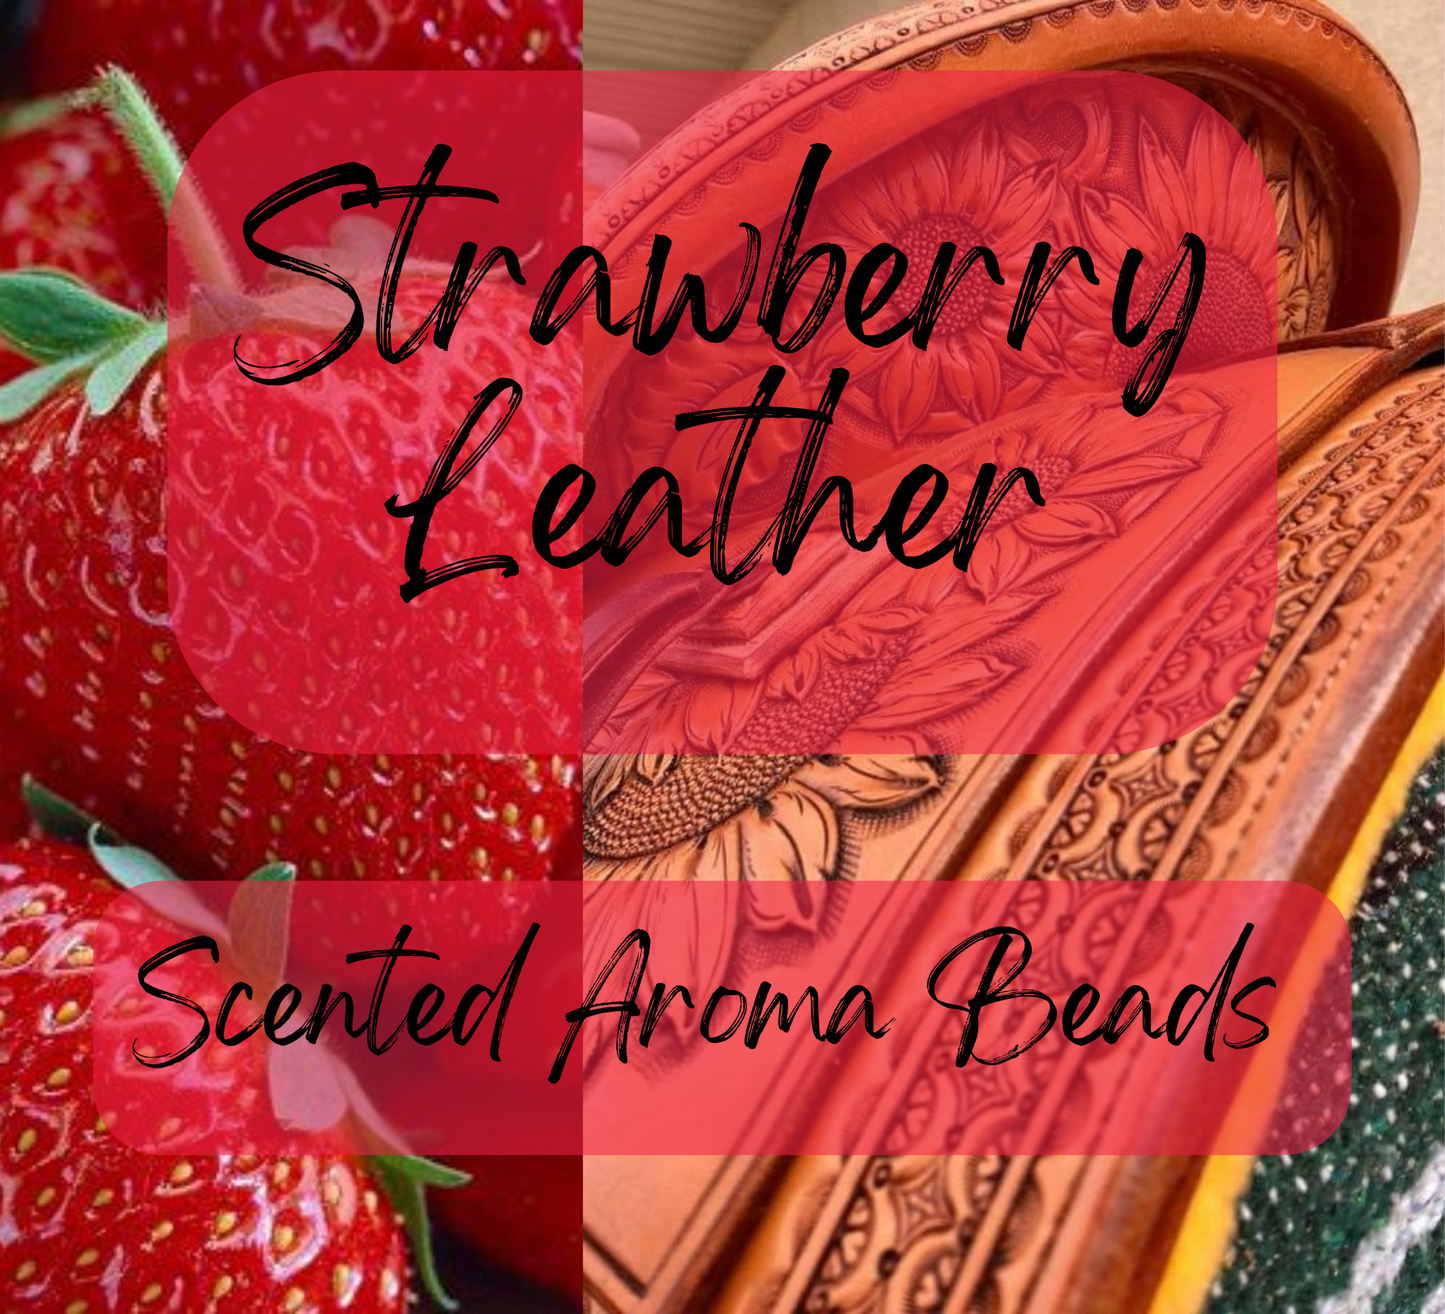 Strawberry Leather Premium Scented Beads